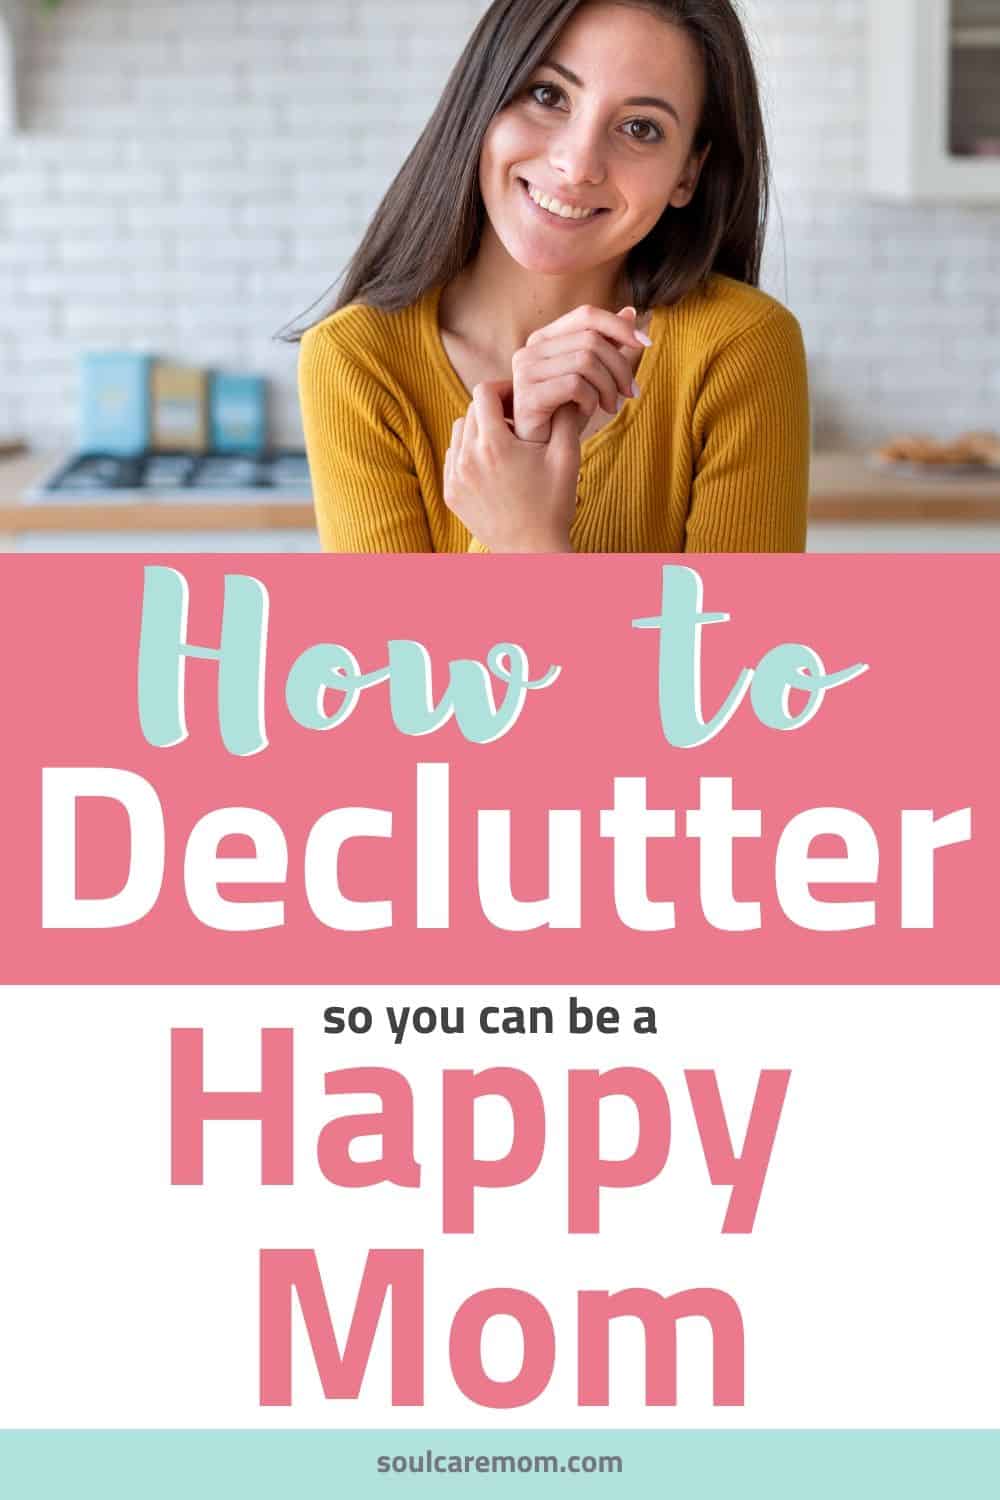 How Physical and Mental Decluttering Can Make You A Happier Mom - Soul Care Mom - Pinterest